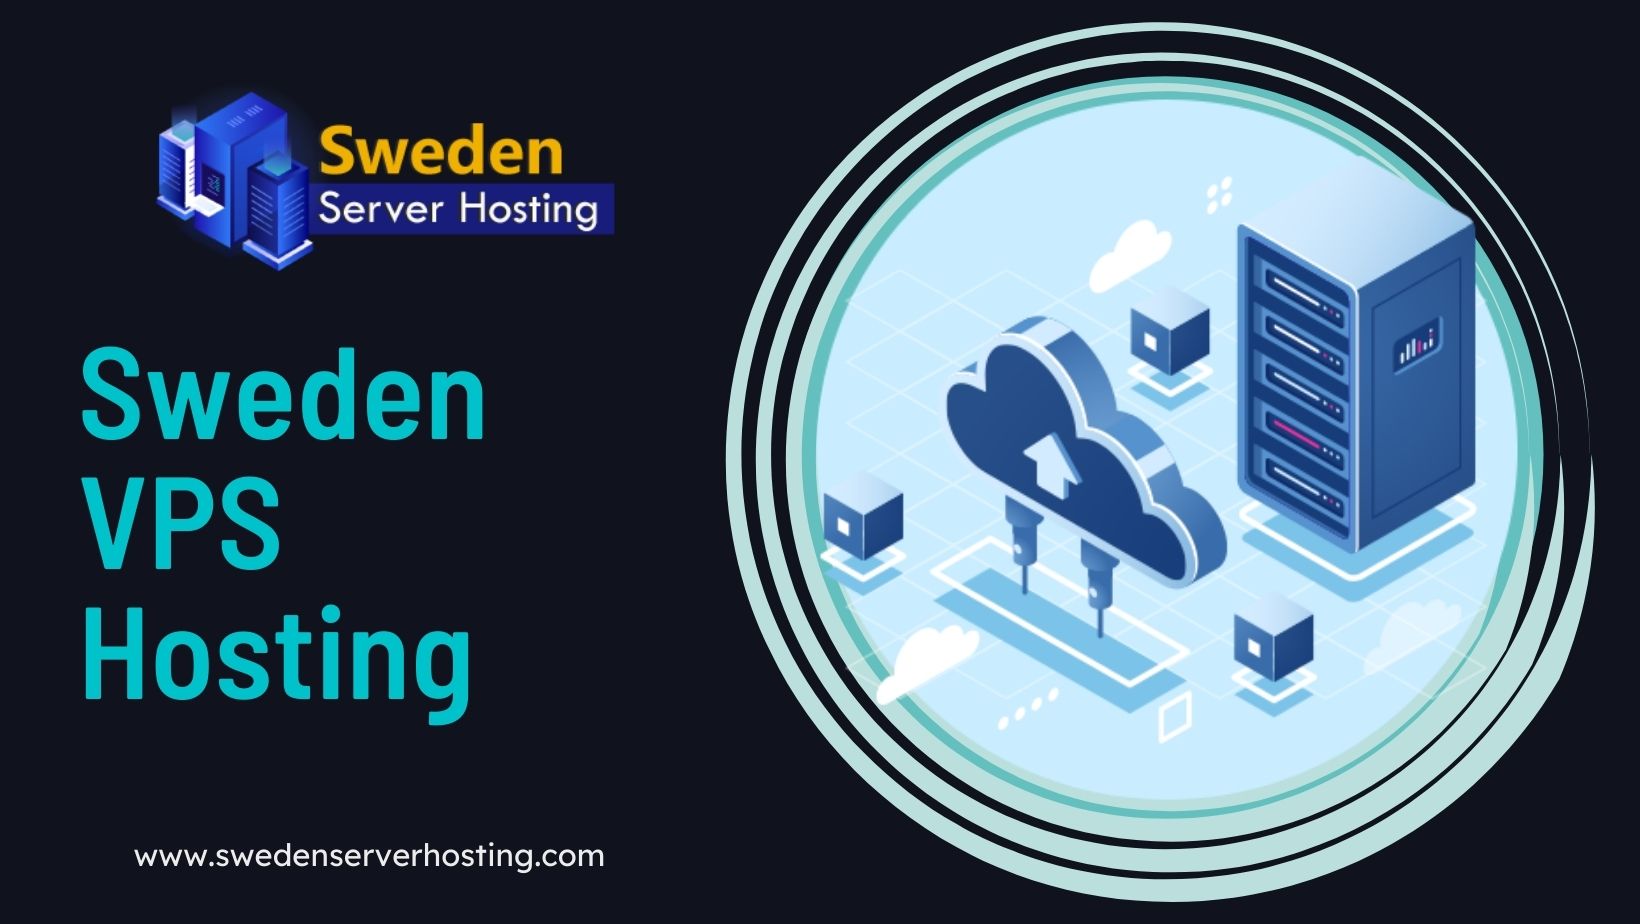 Sweden VPS Hosting from Sweden Server Hosting – The Right Choice for Your Business